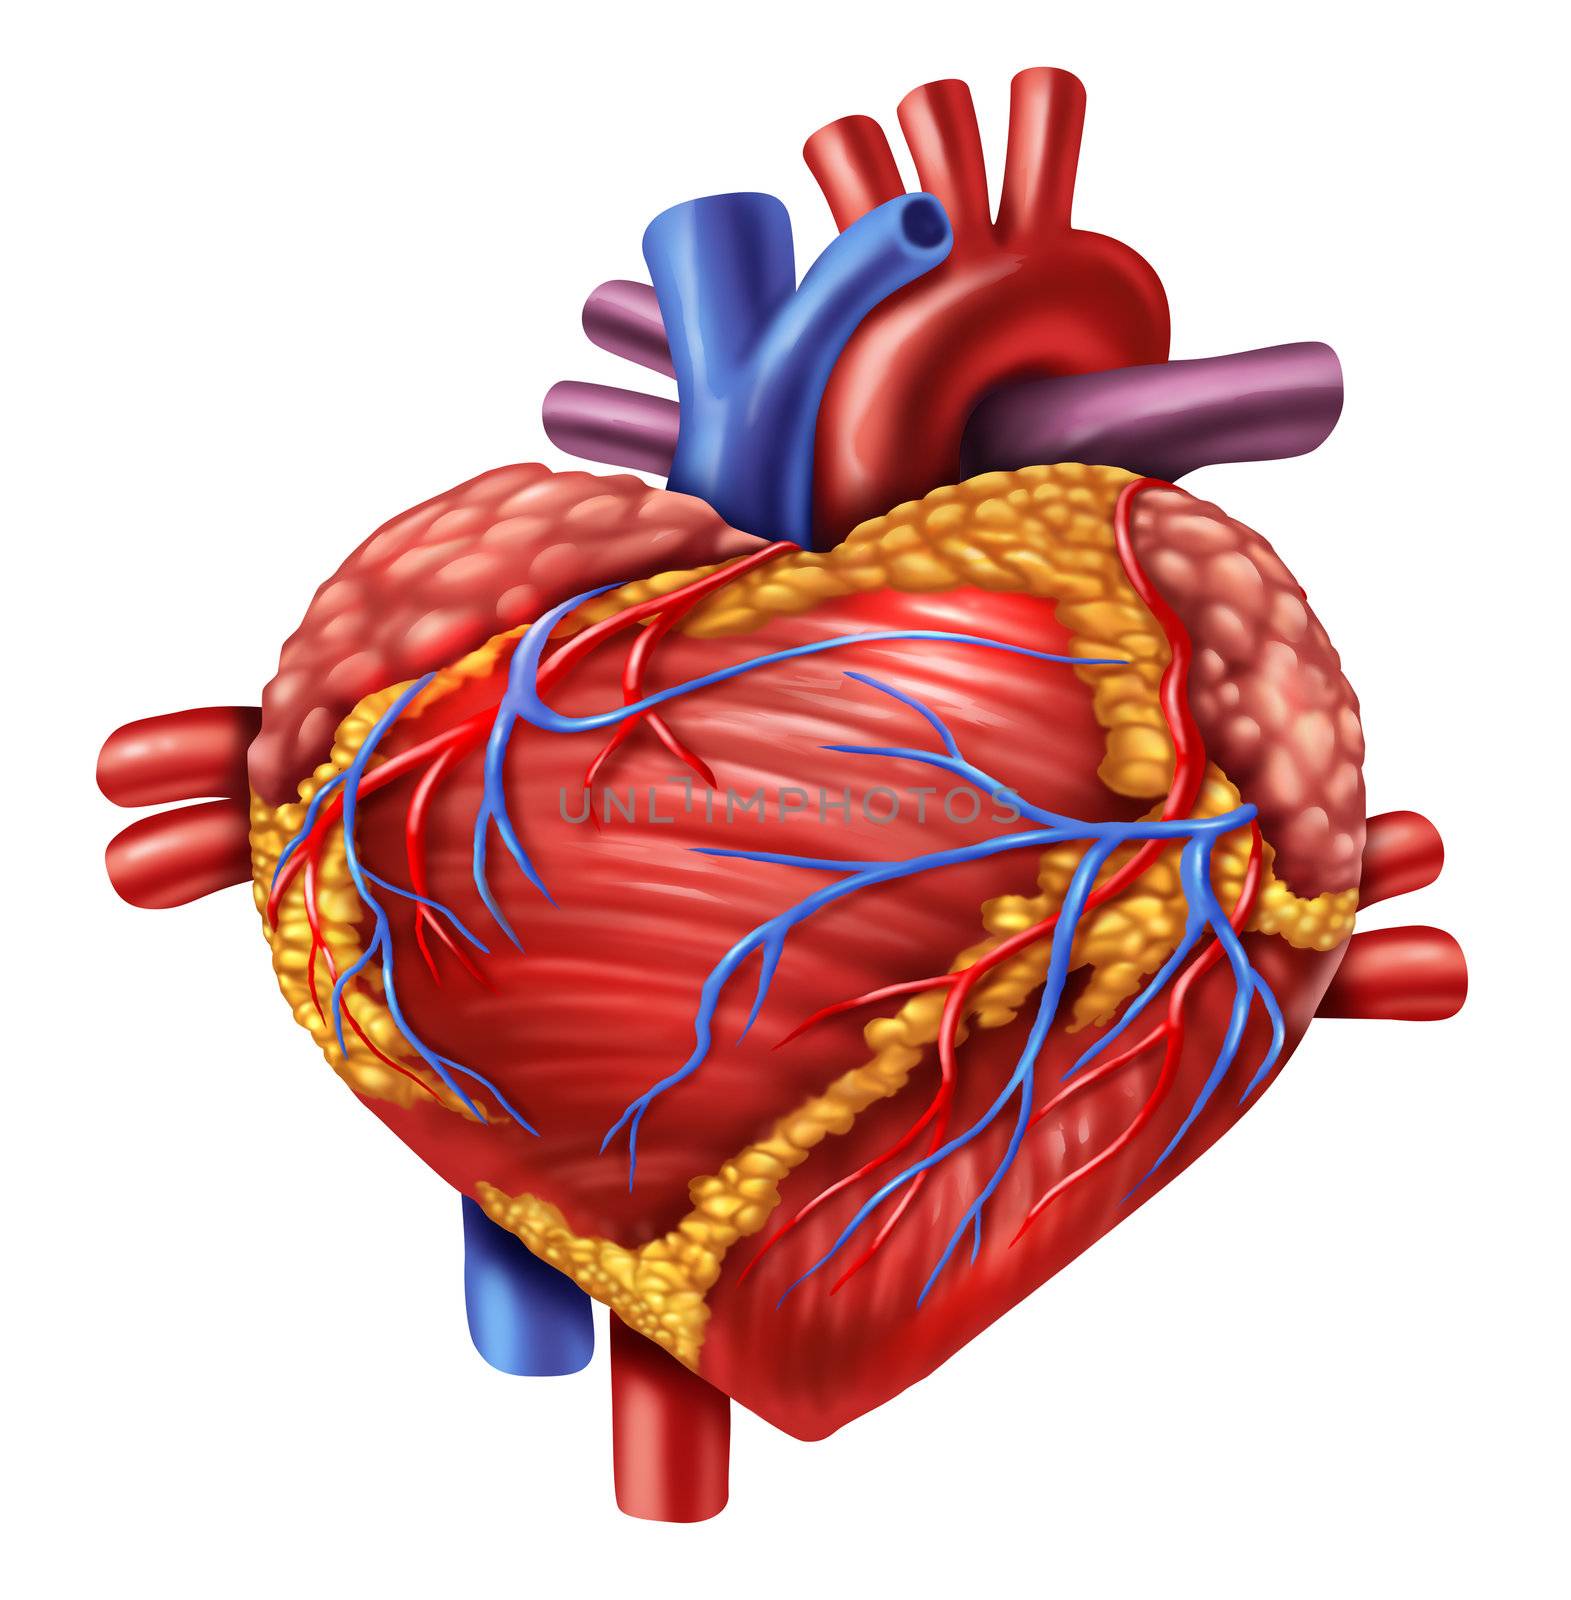 Human heart in the shape of a love symbol using the organ from the body anatomy for loving a healthy living isolated on white background as a medical health care symbol of an inner cardiovascular organ.